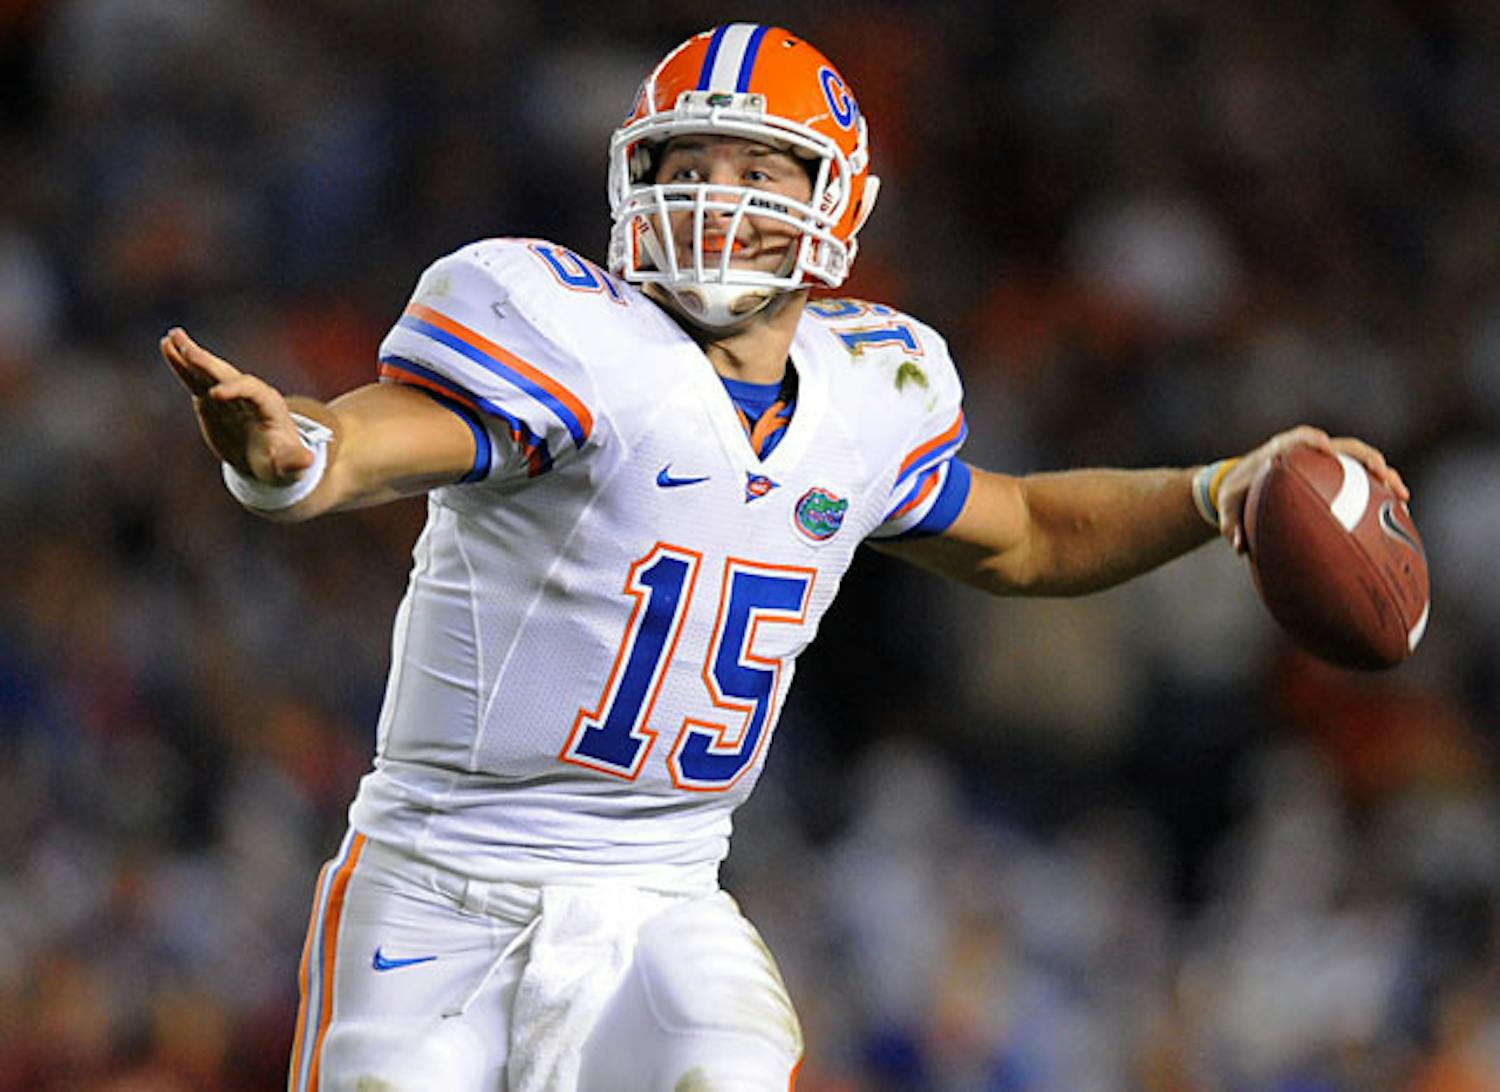 Former Florida quarterback Tim Tebow was listed on the College Football Hall of Fame ballot Monday, June 6, 2022.